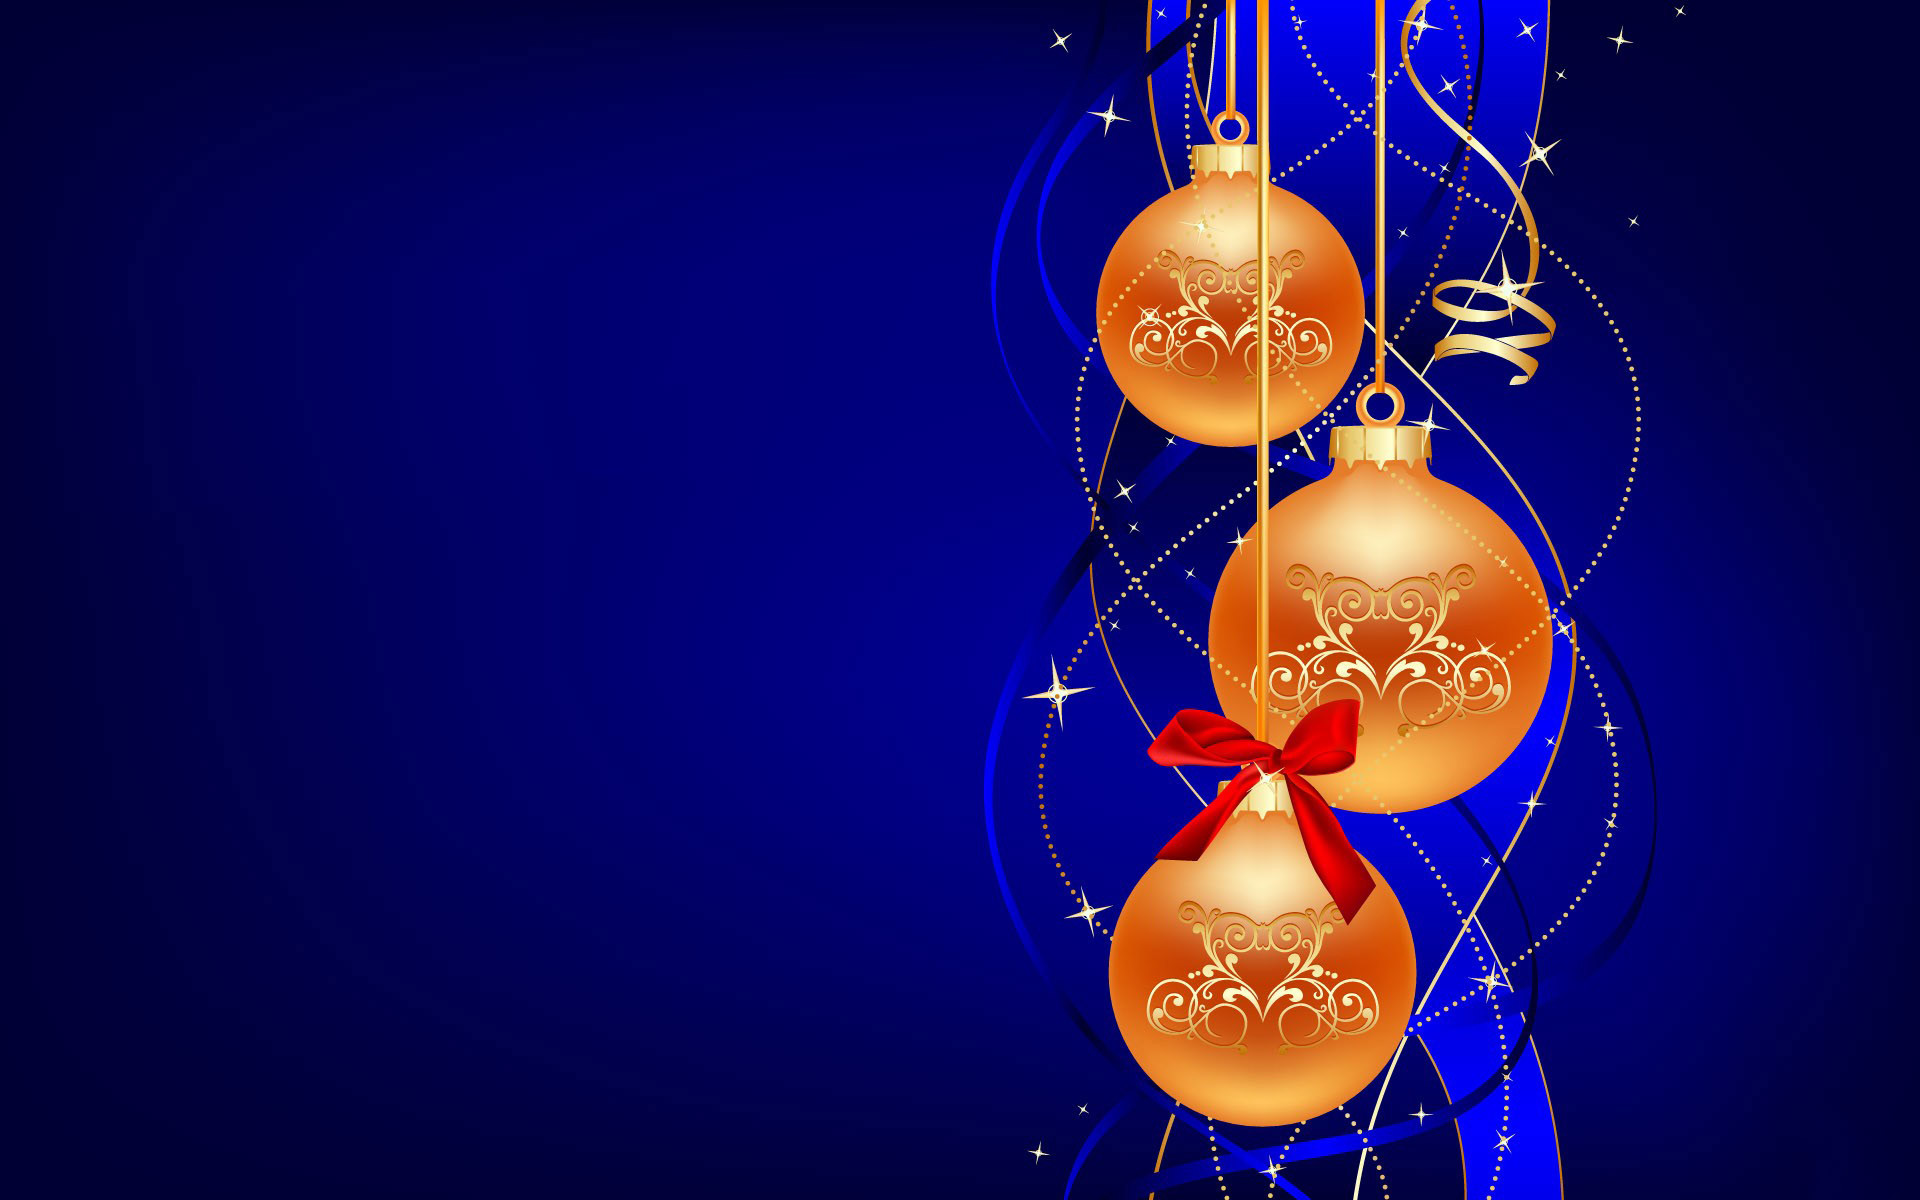 1920x1200 Merry Christmas Wallpapers HD download.